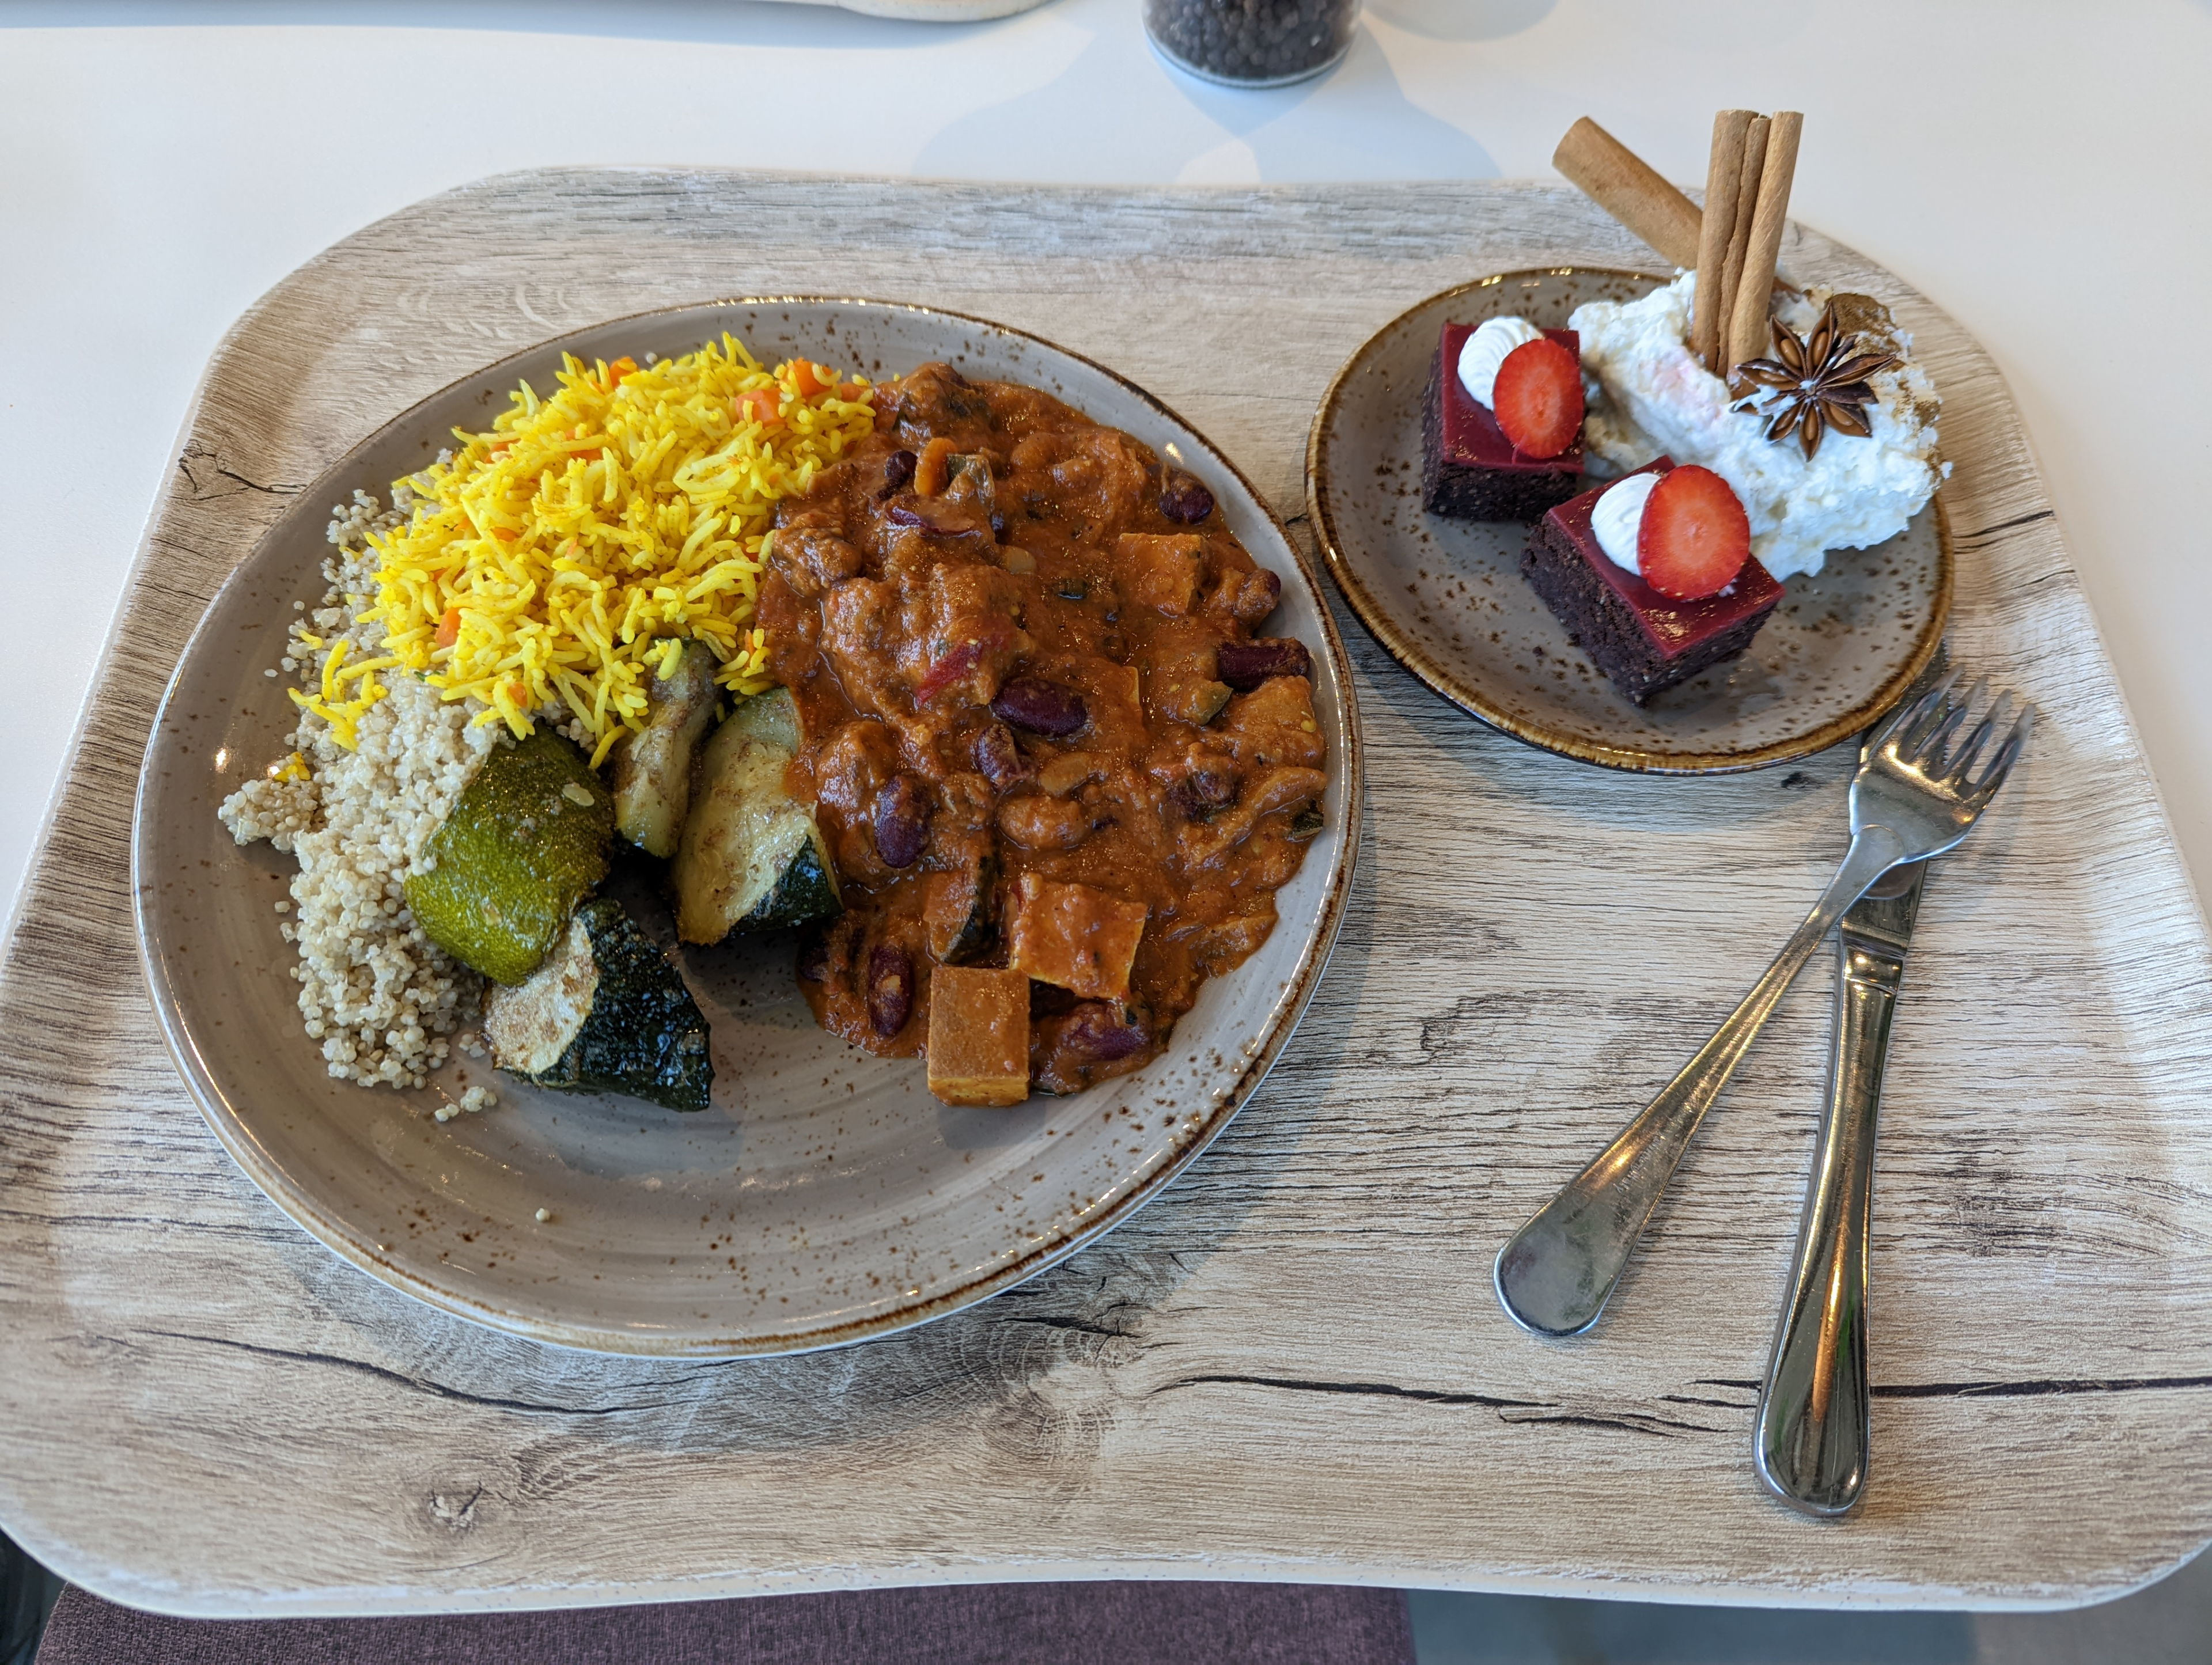 One of my meals at the Google office at The Warsaw Hub